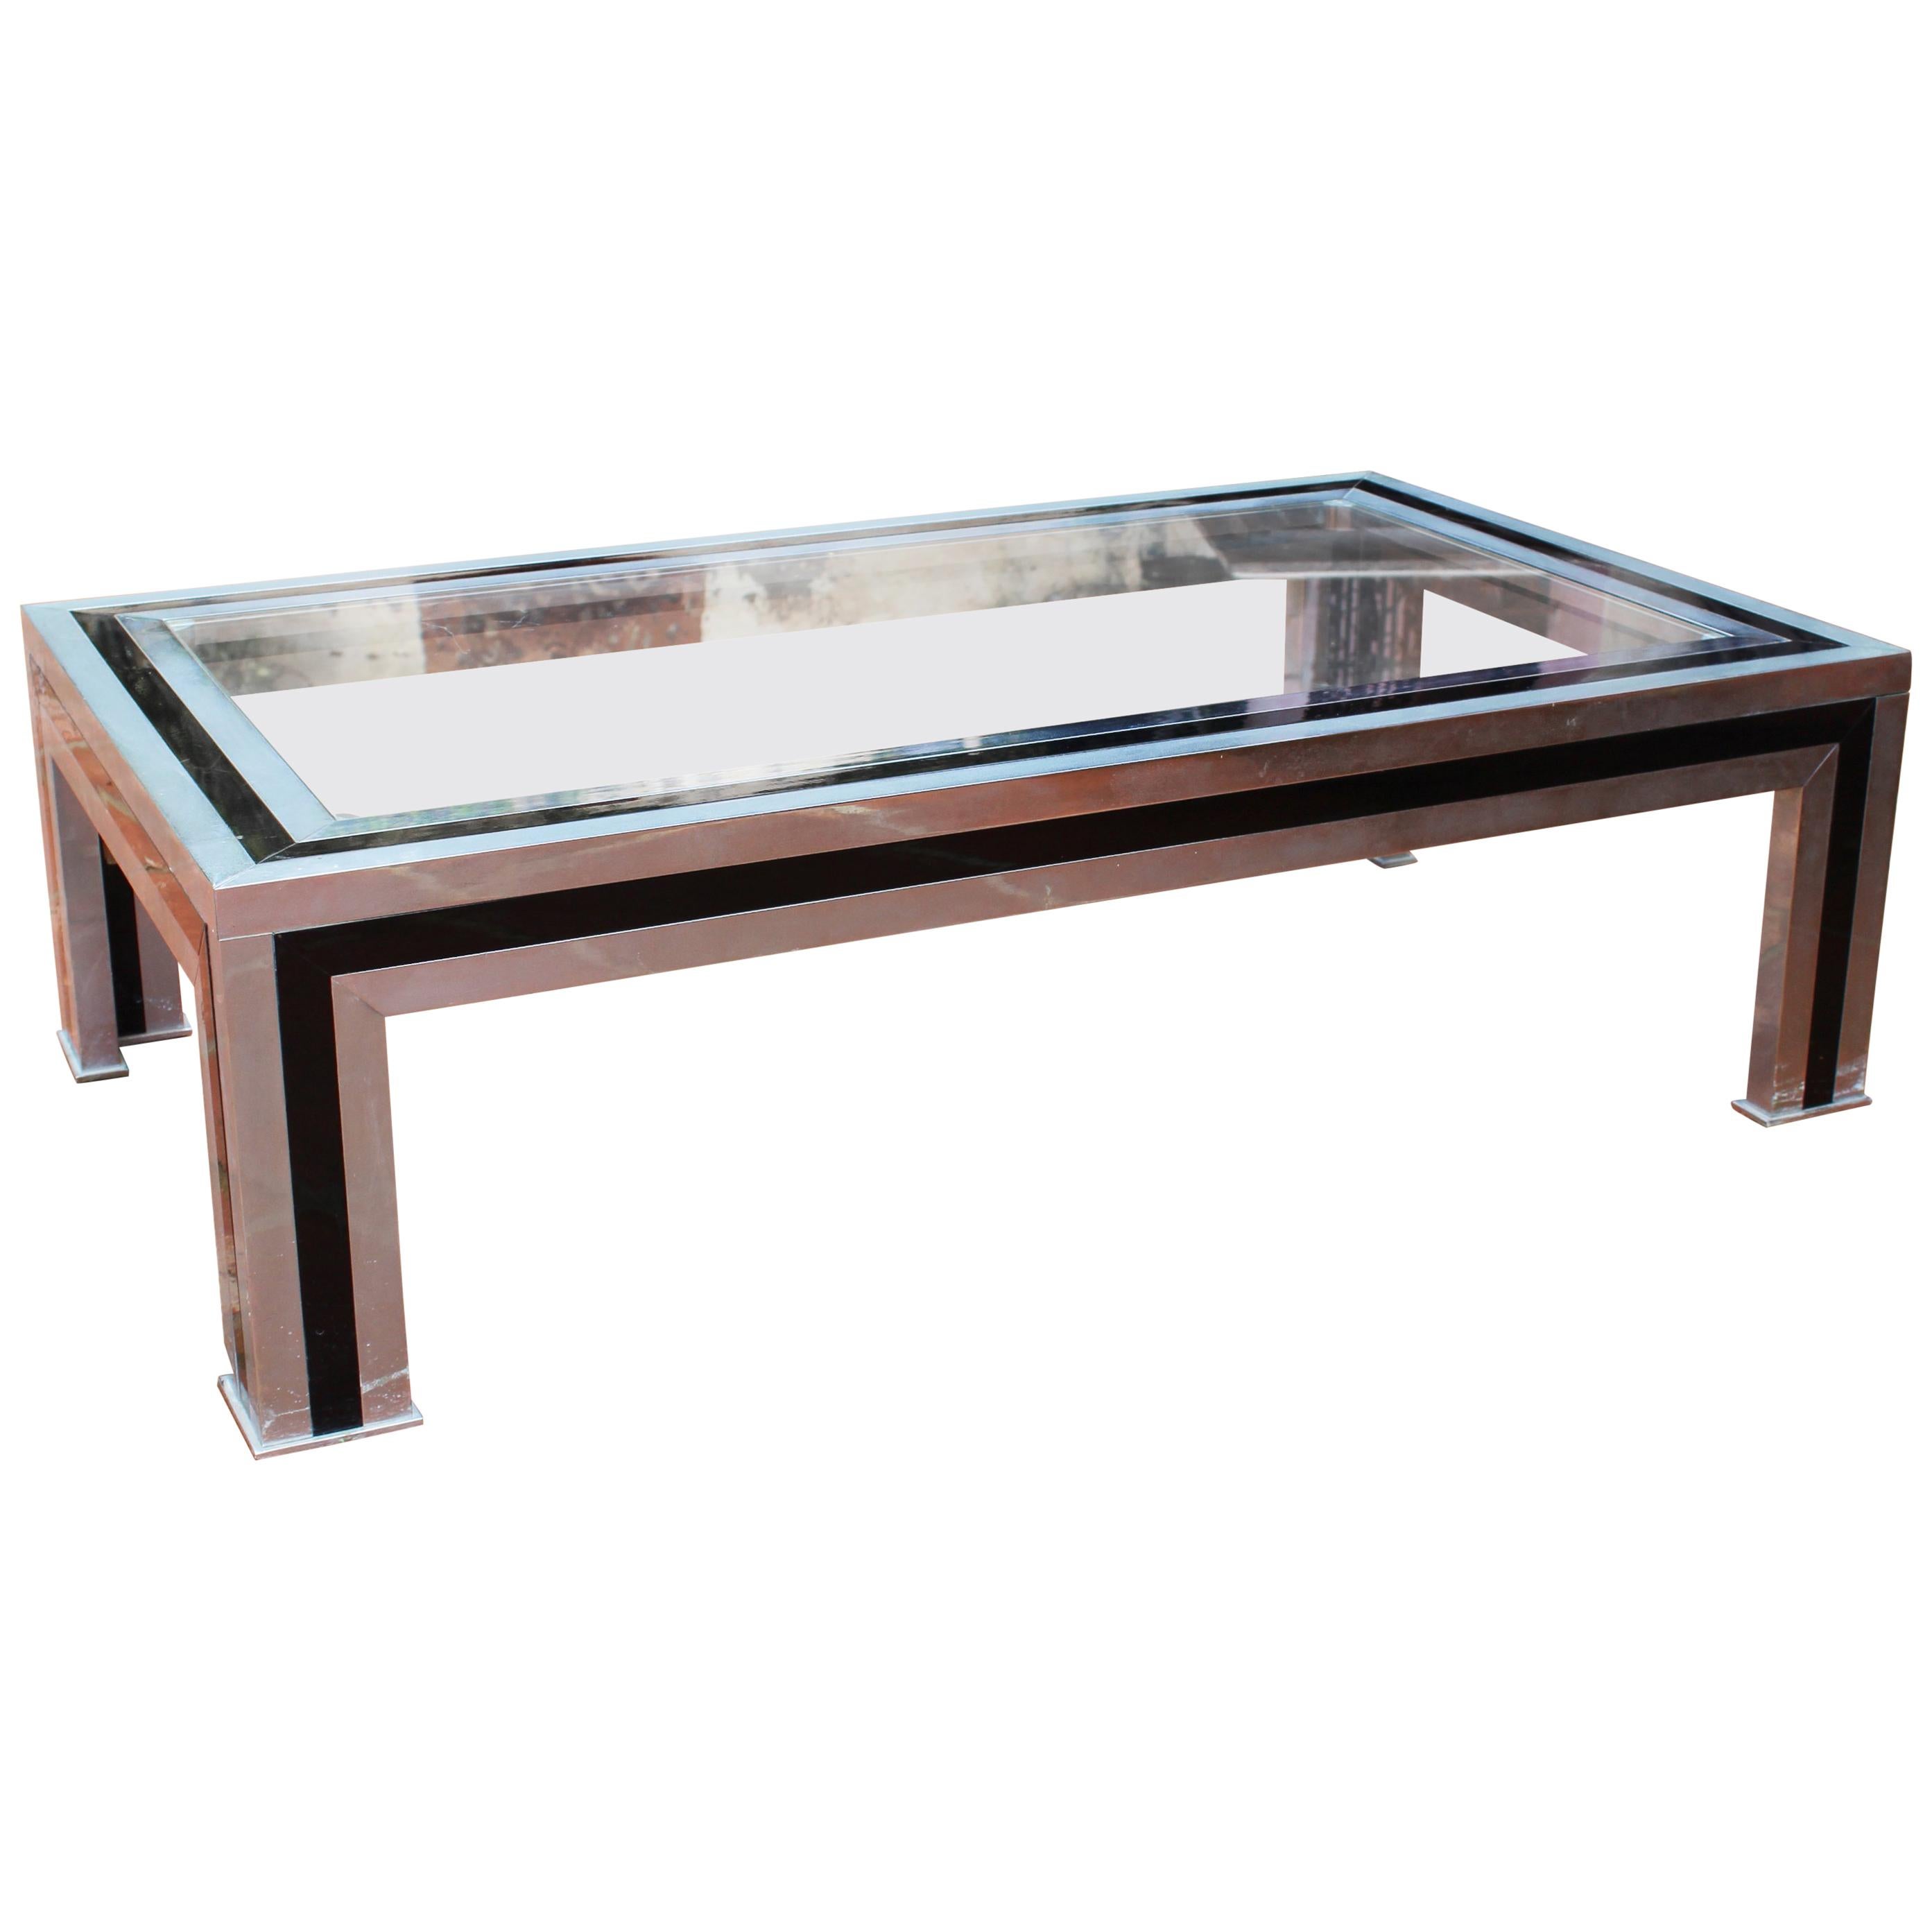 1970s Willy Rizzo Steel Coffee Table with Glass Top